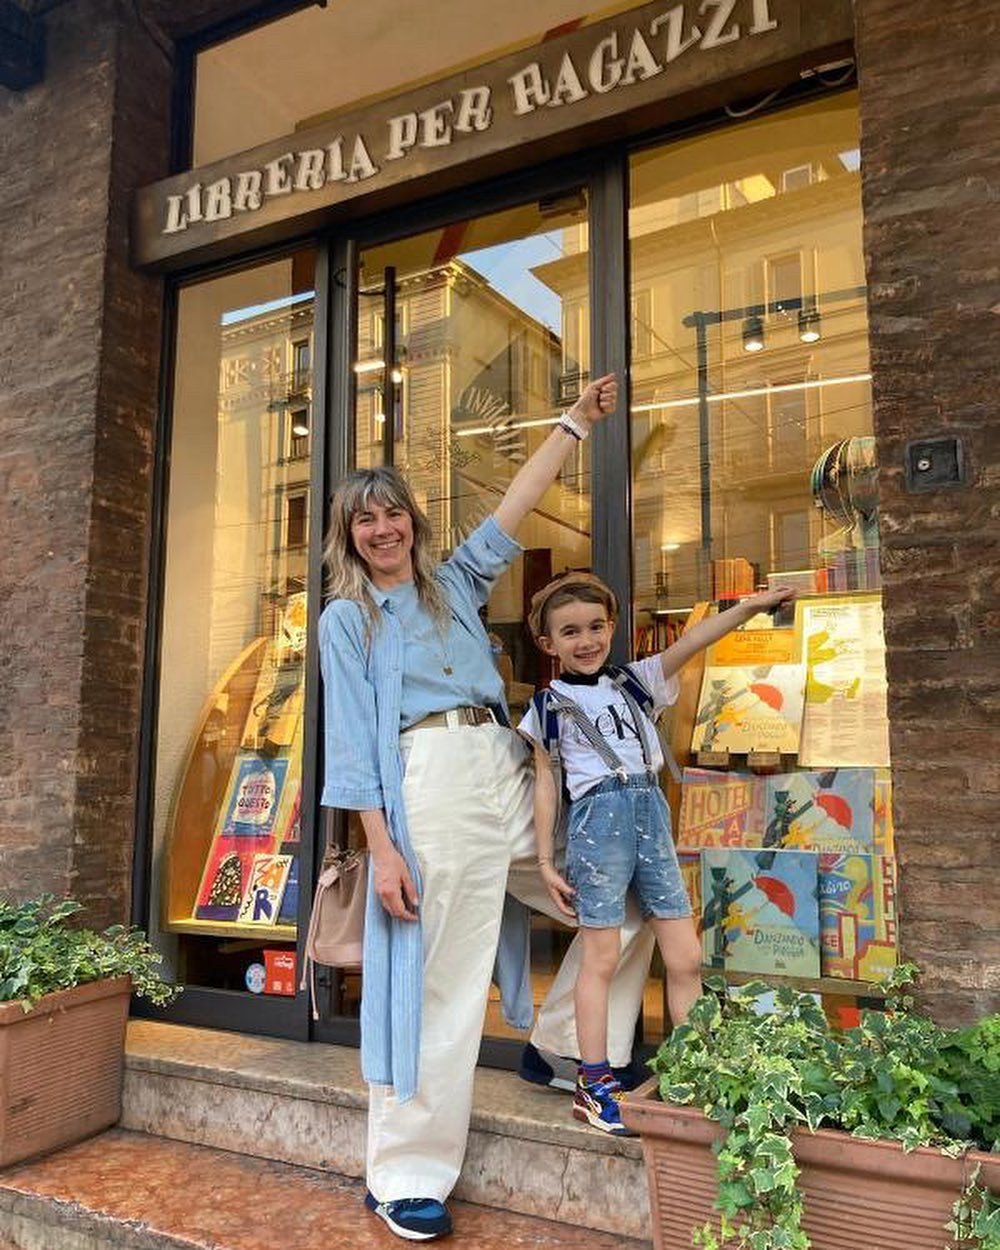 Danzando on tour! 🎶

Here are some recent snaps fresh off the press from my dear friends in Bologna 🧡

After @bolognachildrensbookfair the book headed straight to Giannino Stoppani Libreria per Ragazzi in the city centre for a cheerful presentation